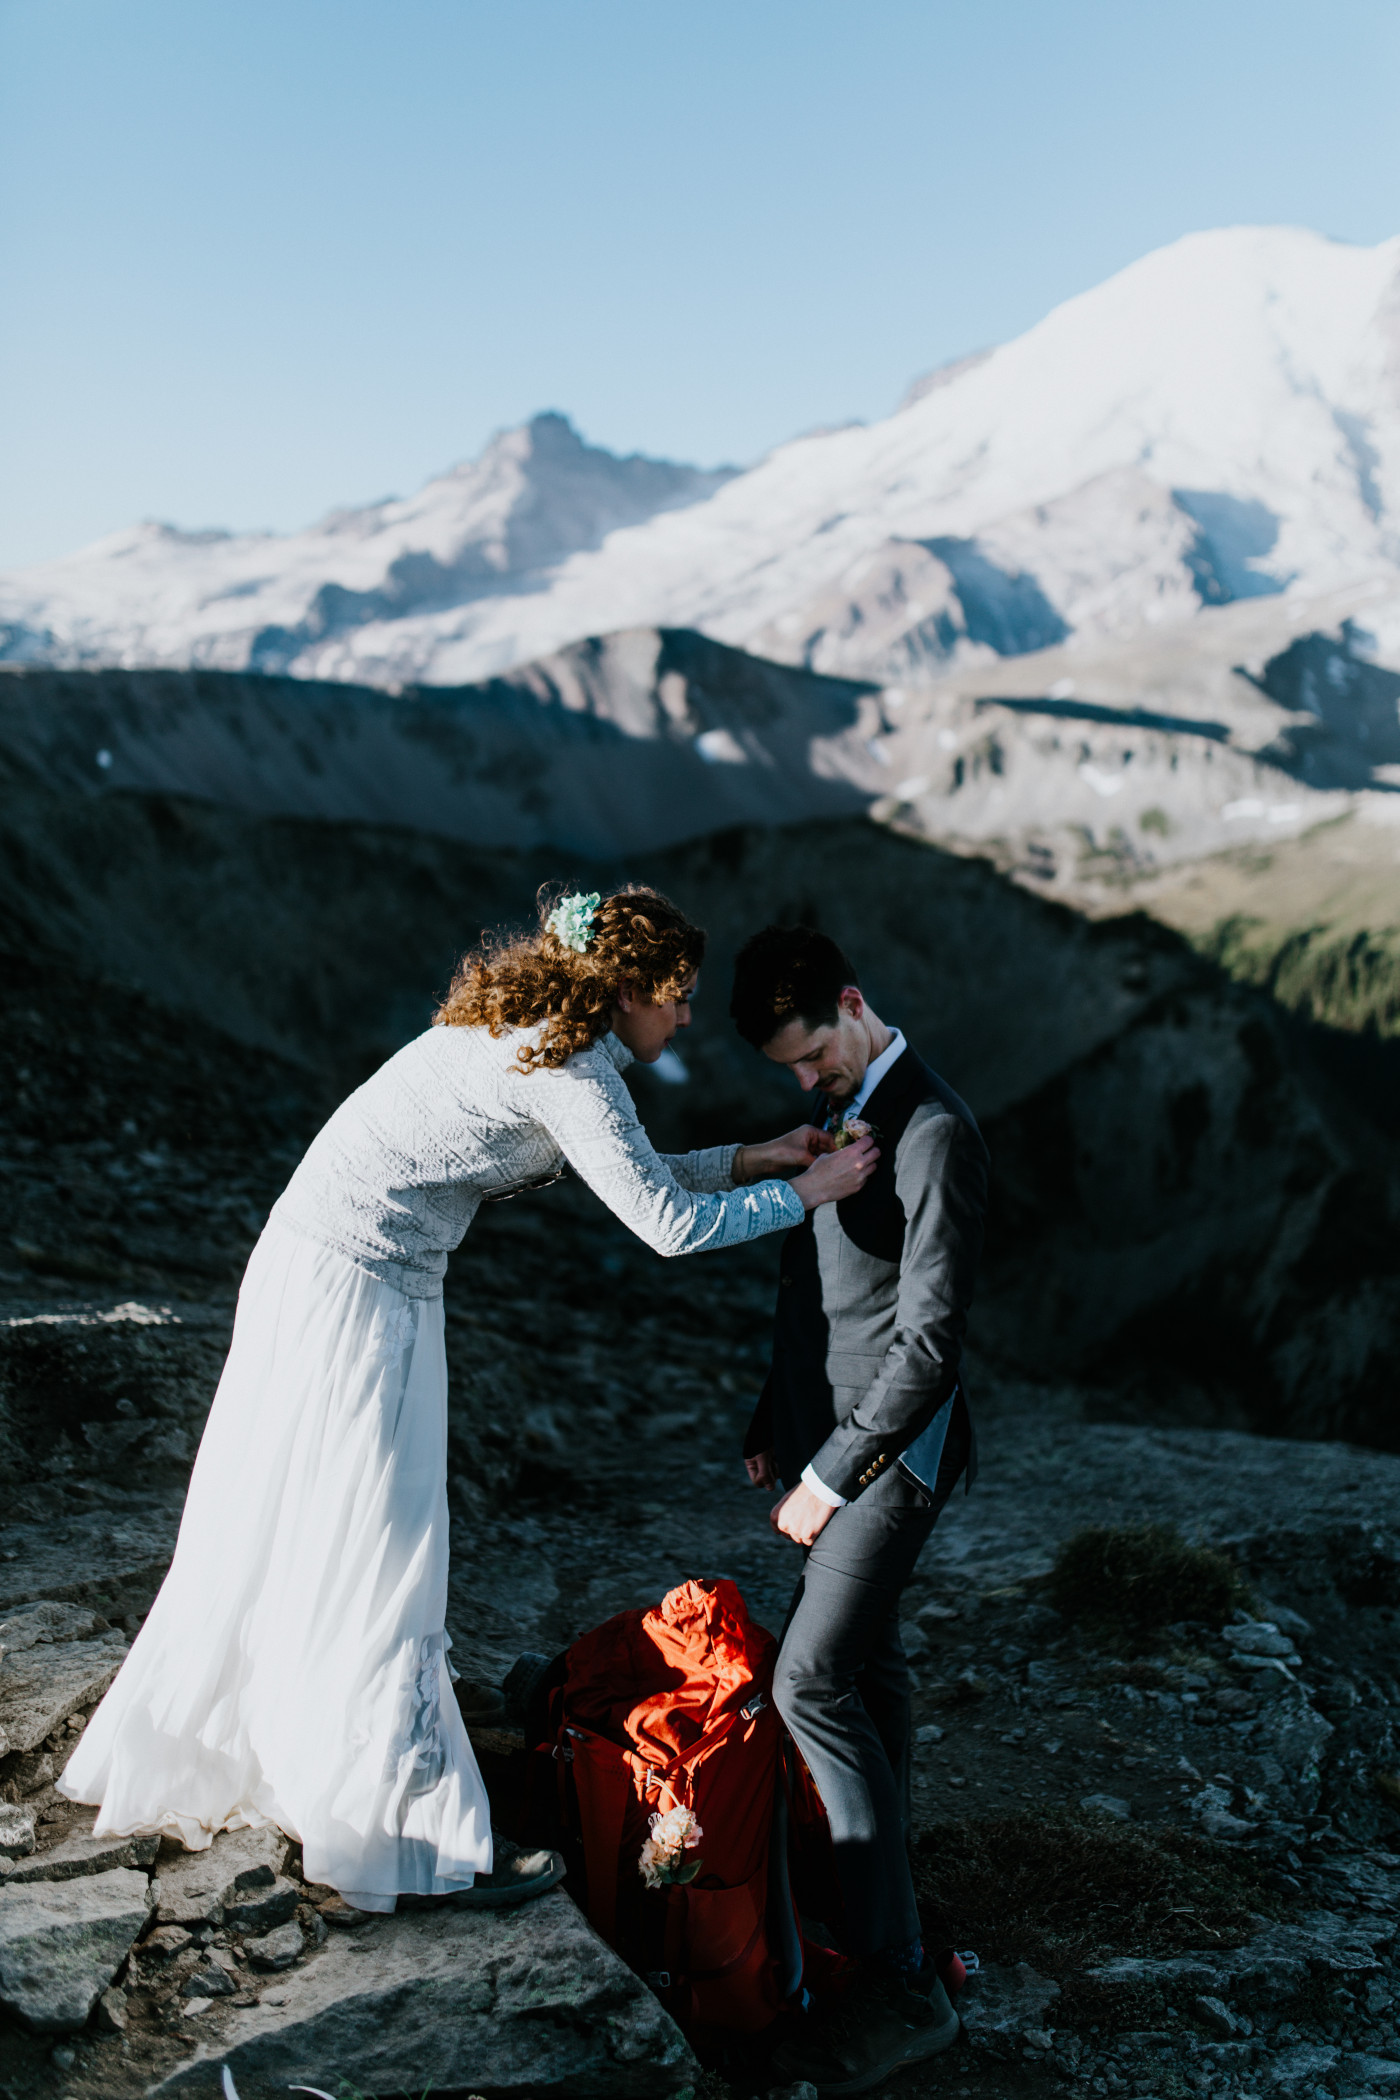 Chad and Tasha get ready for their ceremony. Elopement photography at Mount Rainier by Sienna Plus Josh.